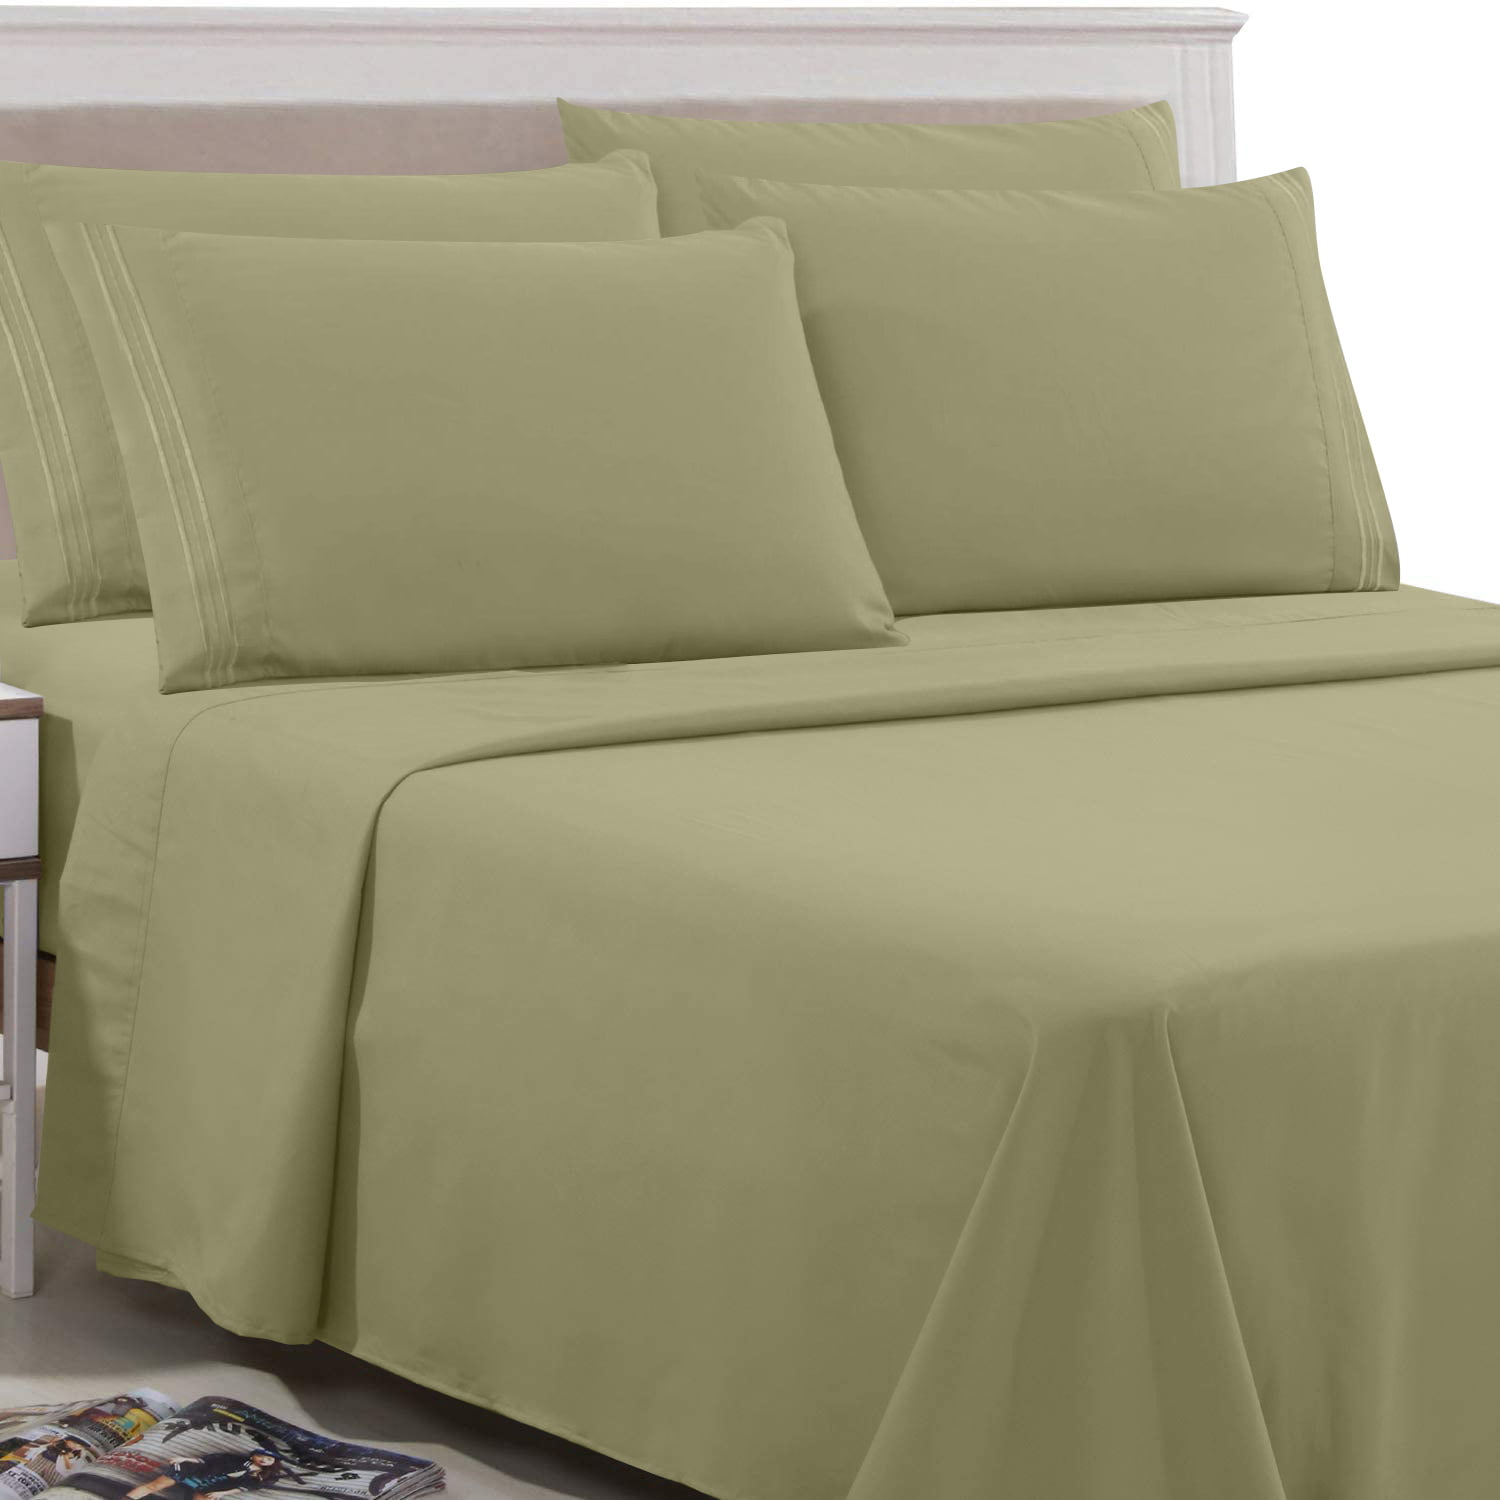 Details about   1000 Thread Count Cotton Deep Pocket Bedding Items King XL Size All Color 